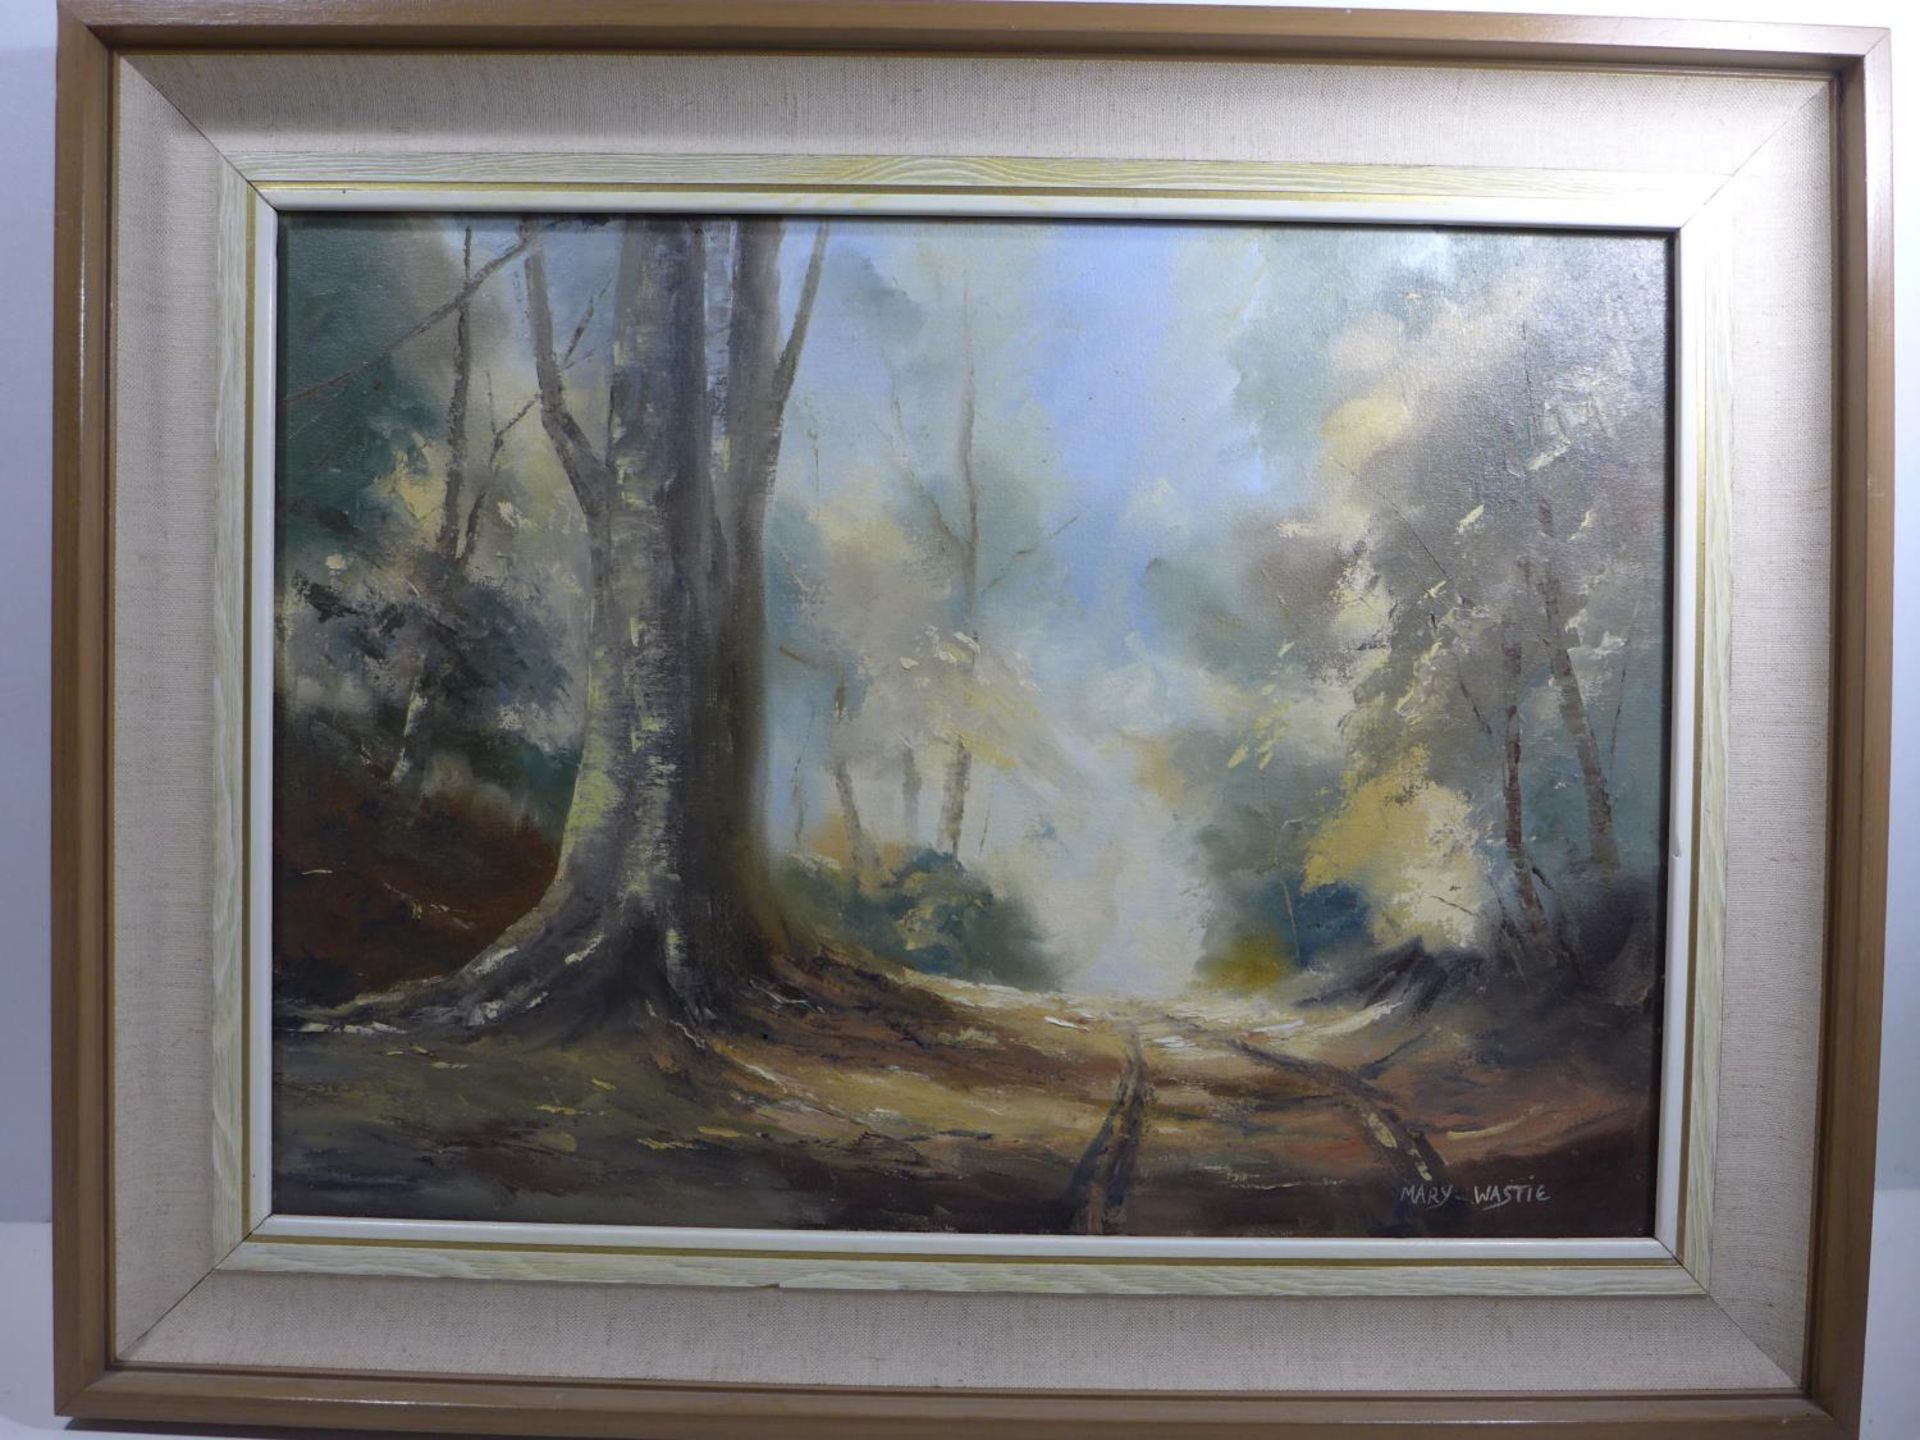 A MARY WASTIE (BRITISH/CORNISH BORN 1935) 'WOODLAND WALK', OIL ON CANVAS, SIGNED LOWER RIGHT, 40 X